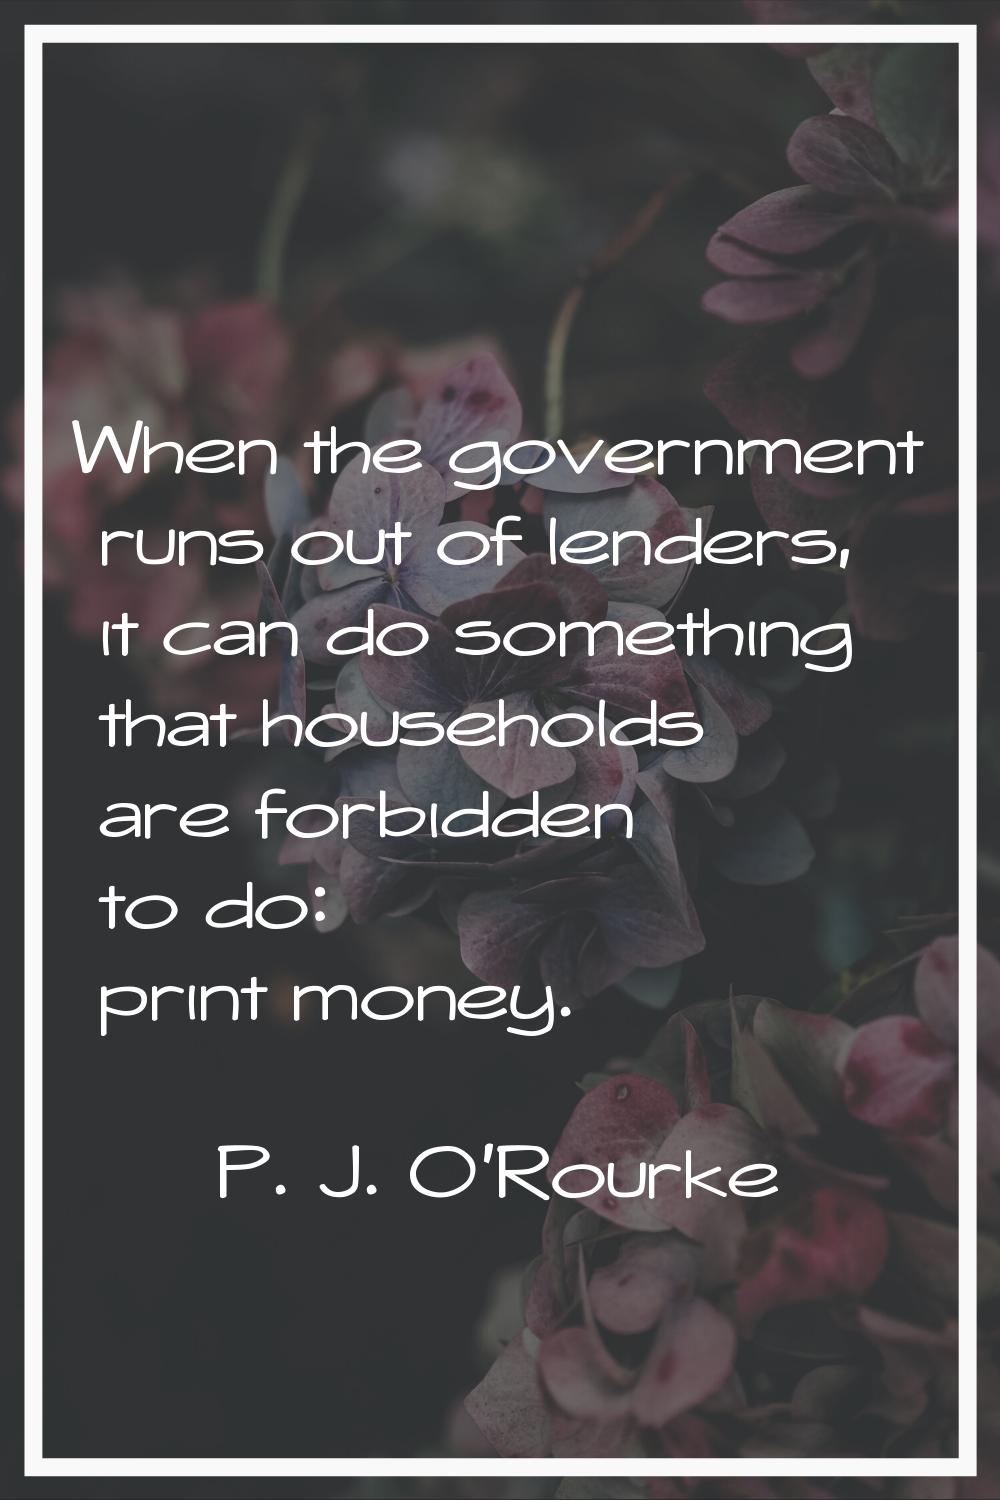 When the government runs out of lenders, it can do something that households are forbidden to do: p